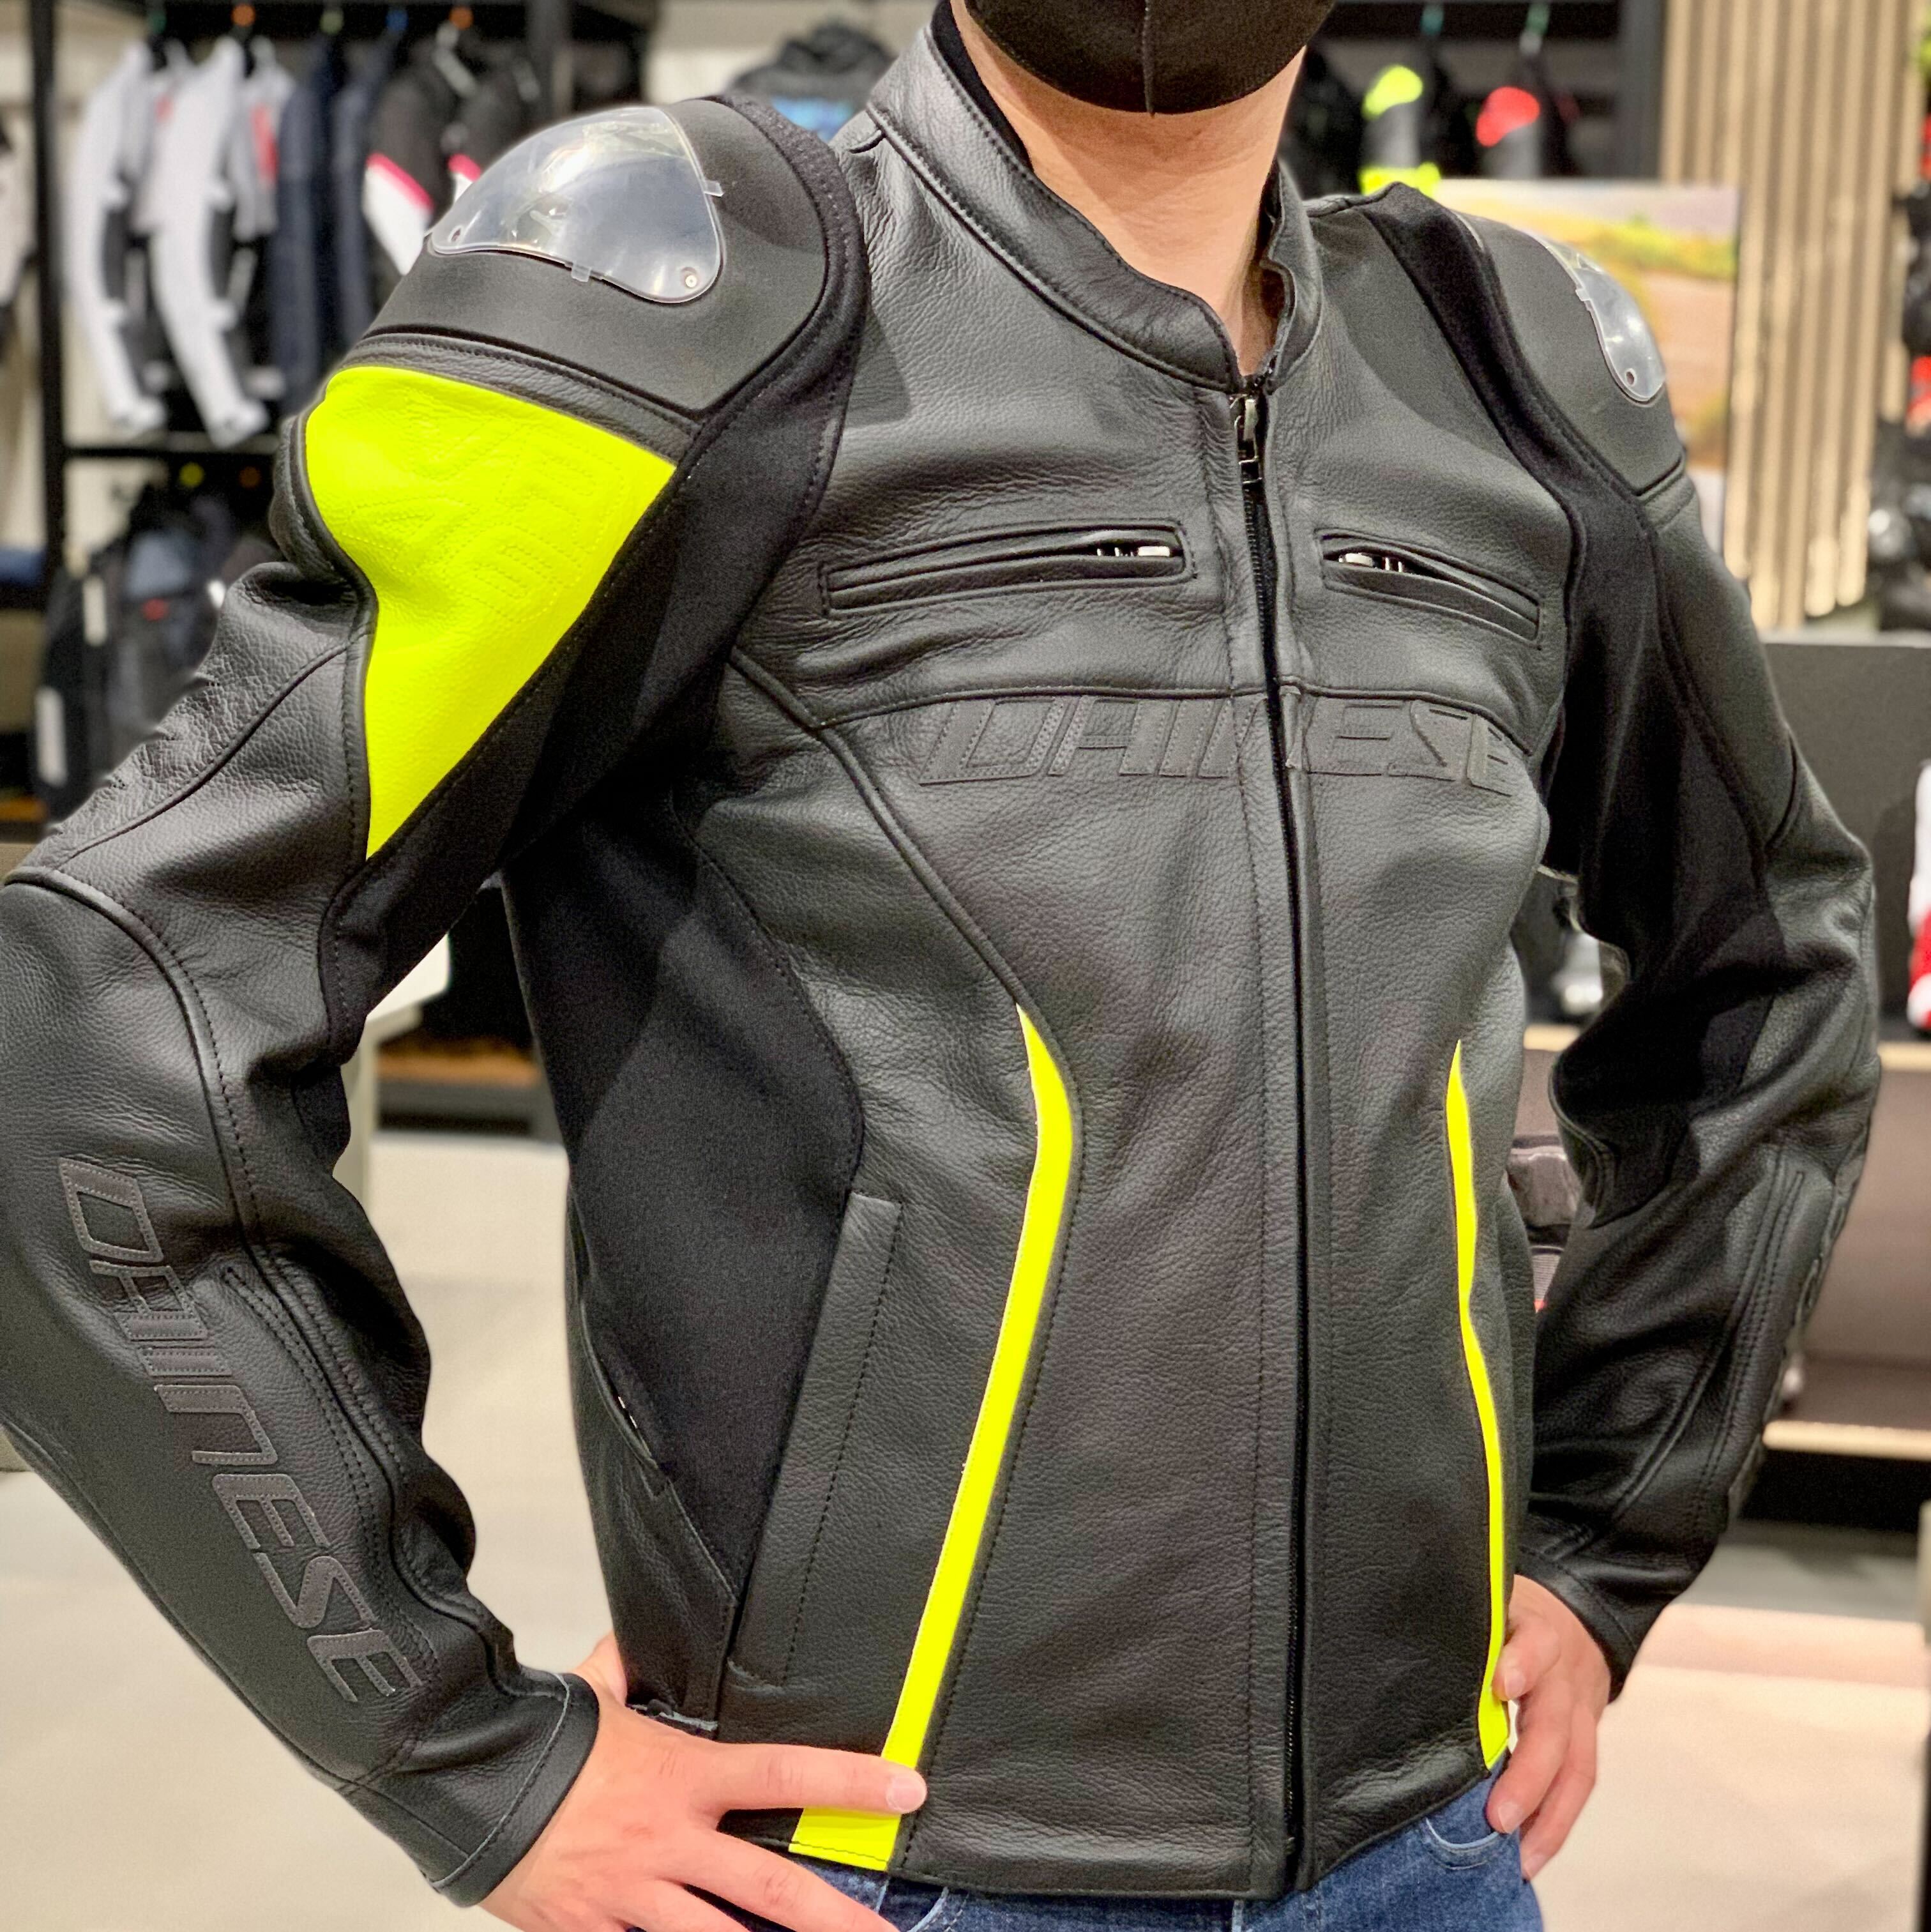 DAINESE VR46 CURB LEATHER JACKET新品未使用です